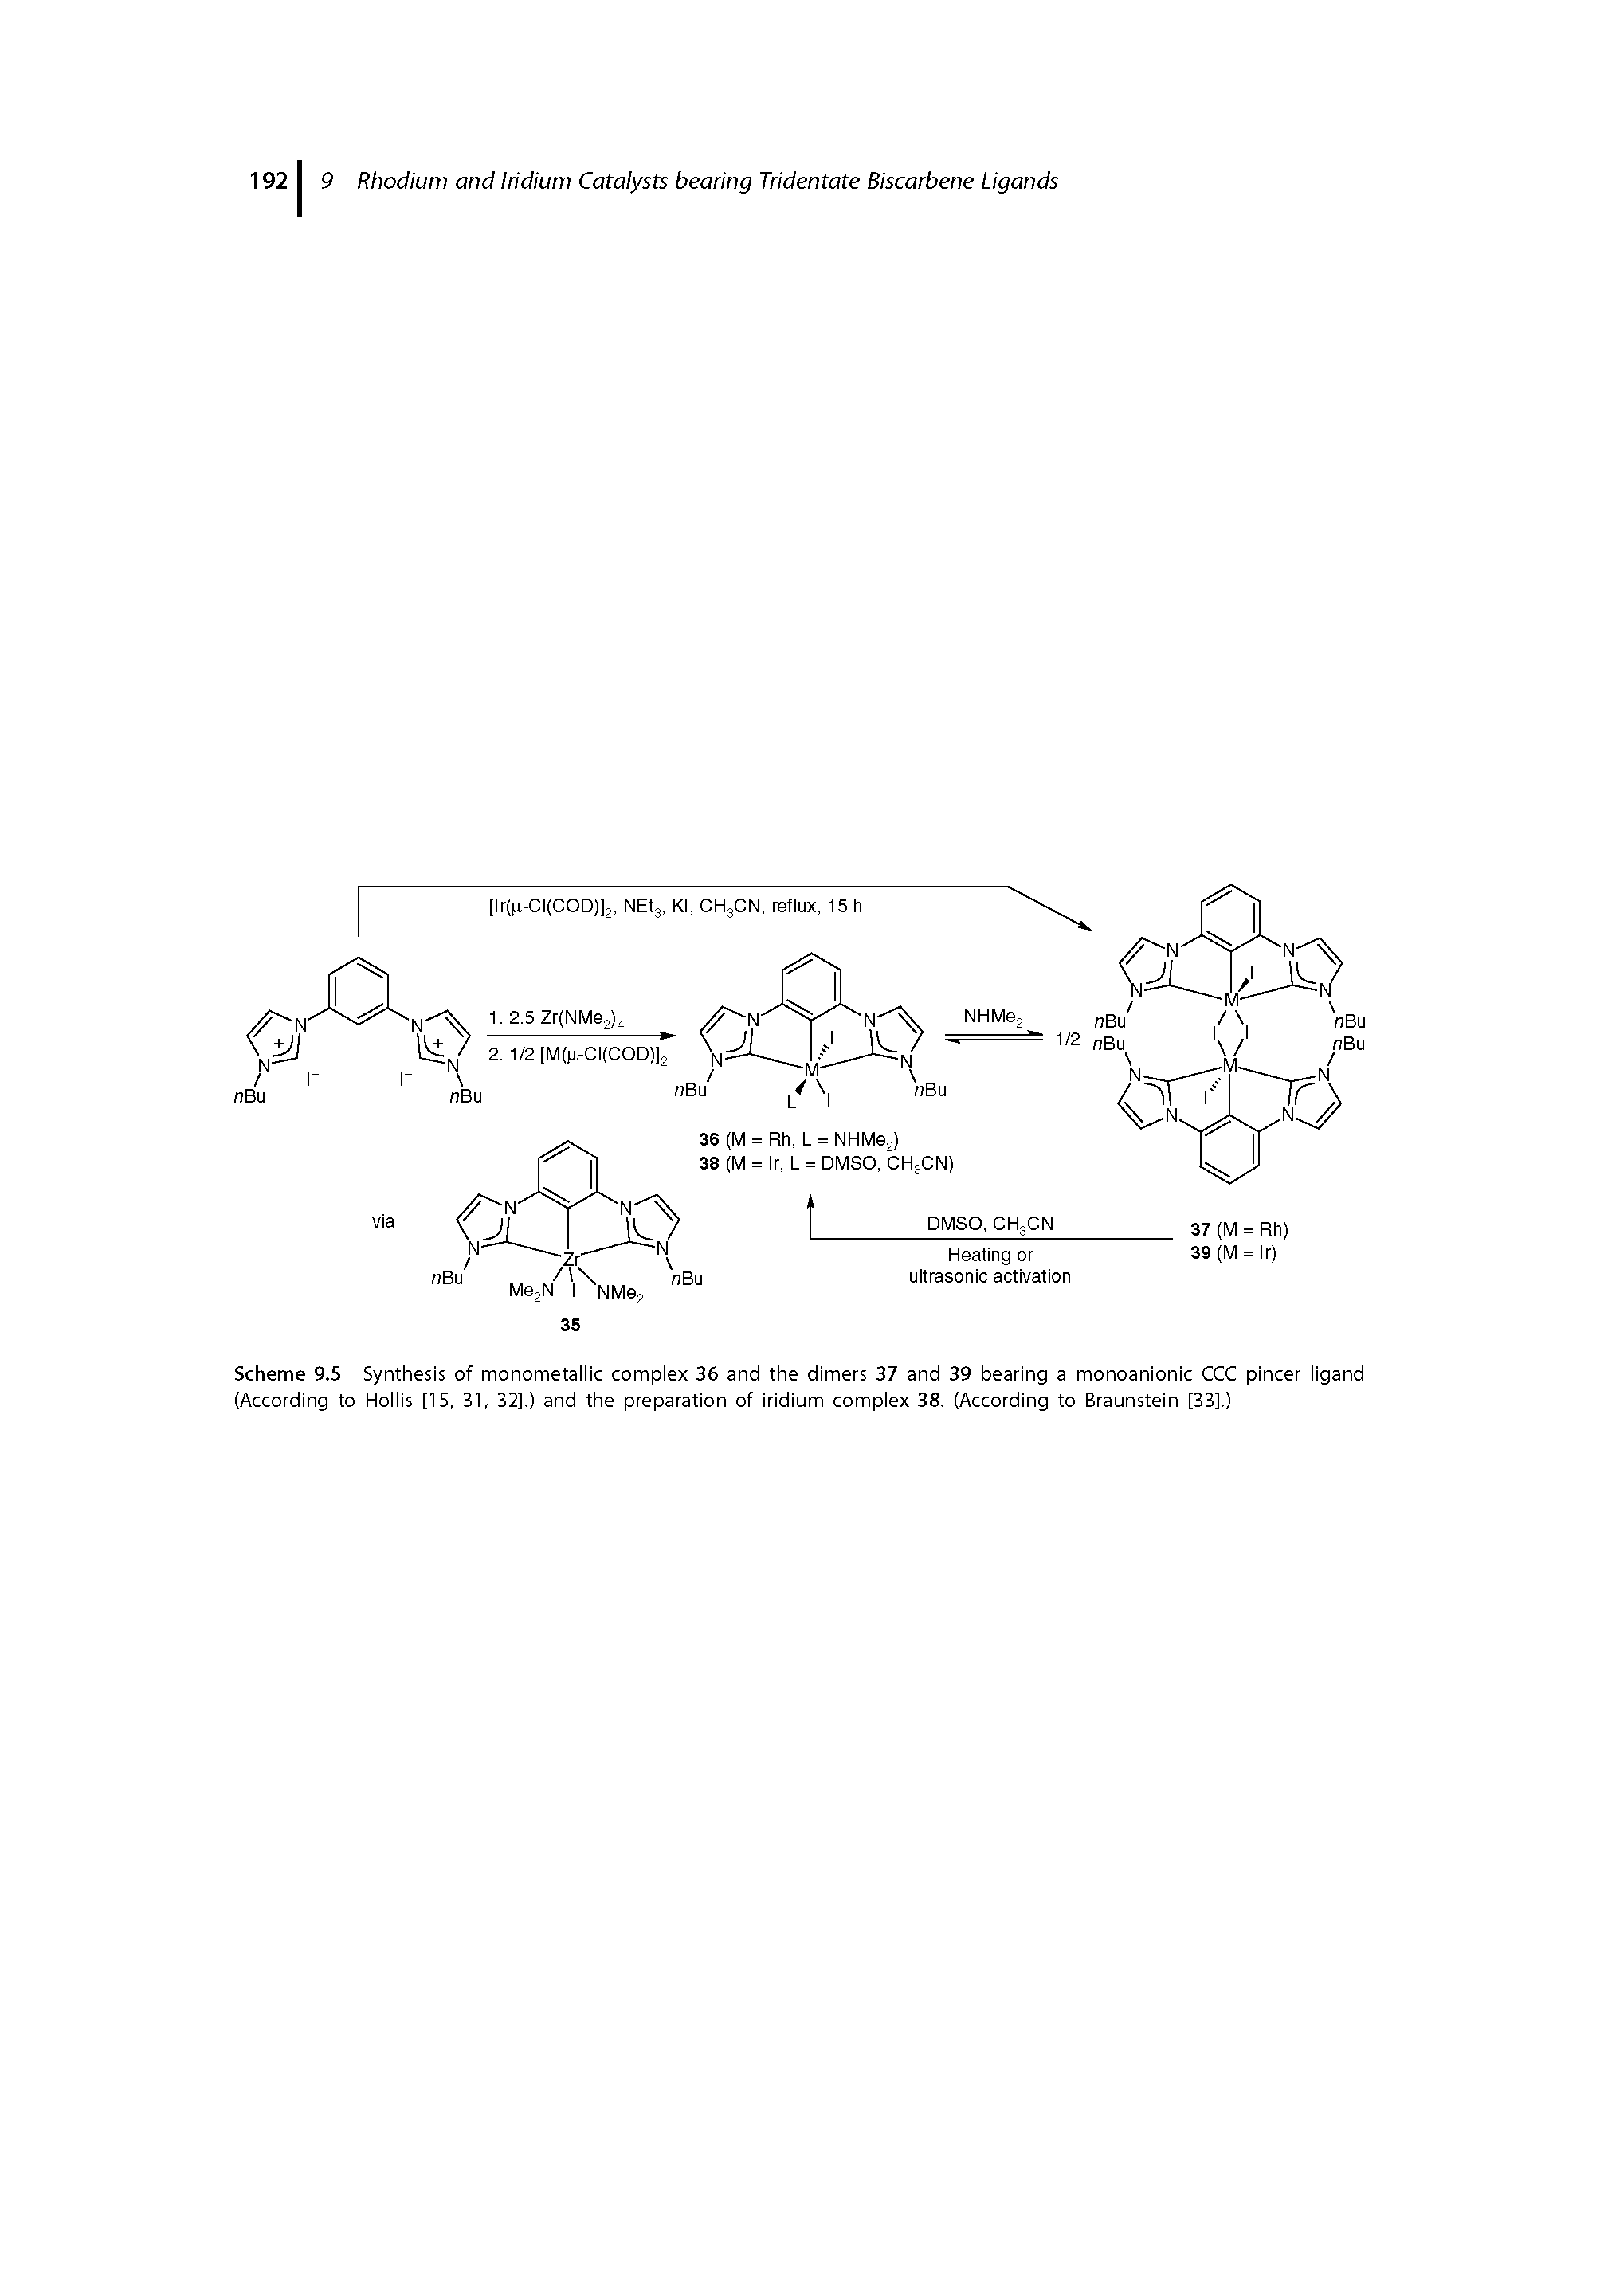 Scheme 9.5 Synthesis of monometallic complex 36 and the dimers 37 and 39 bearing a monoanionic CCC pincer ligand (According to Hollis [15, 31, 32].) and the preparation of iridium complex 38. (According to Braunstein [33].)...